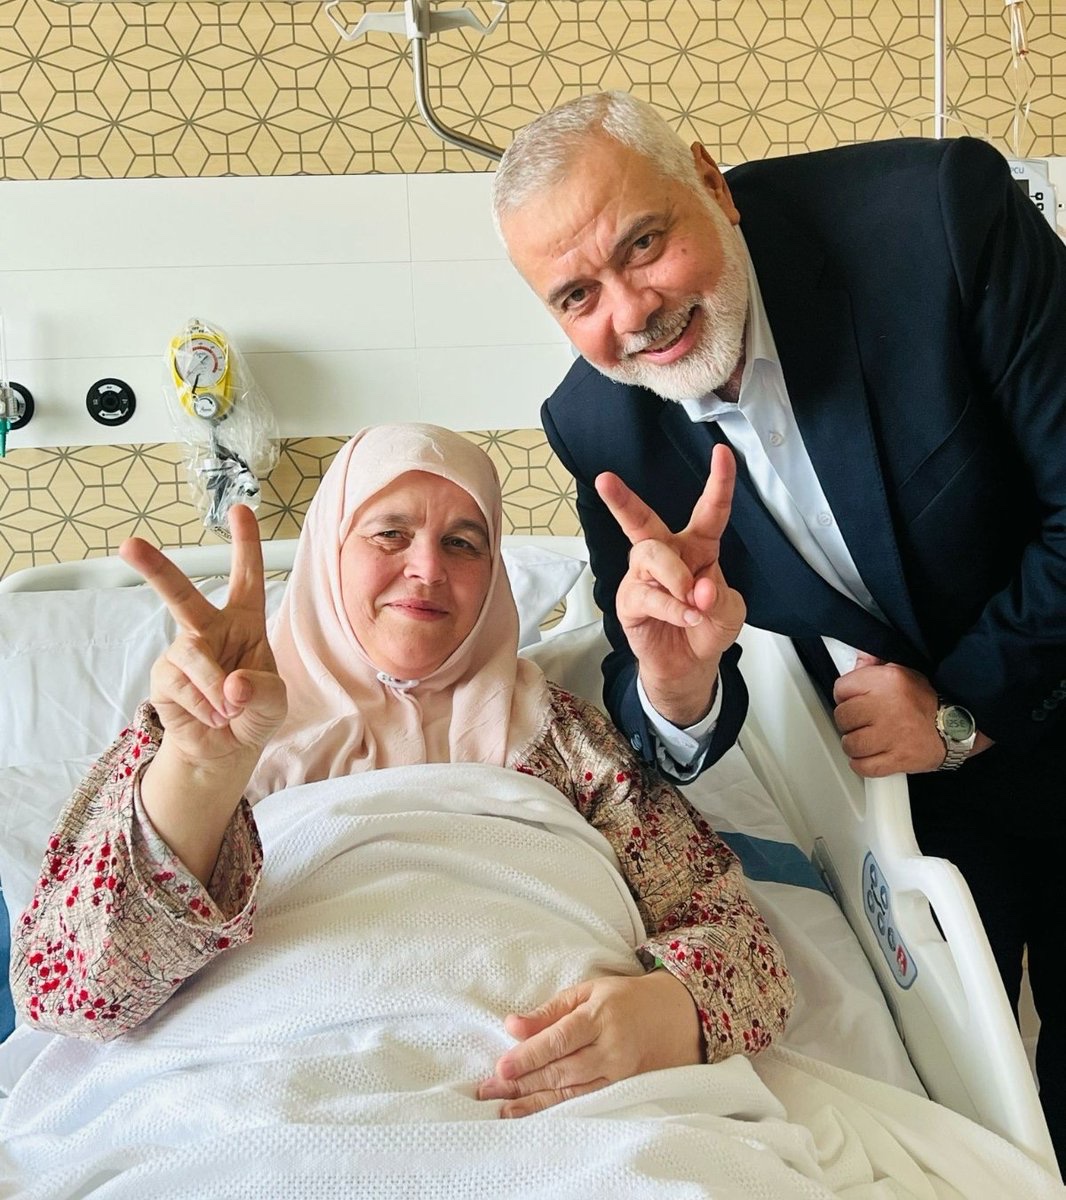 Hamas leader Ismail Haniyeh informed his wife about the liquidation of their terrorist sons while she was in the hospital. In a photo taken there, they signaled victory with their hands because, as you may know, that's how death cults work.